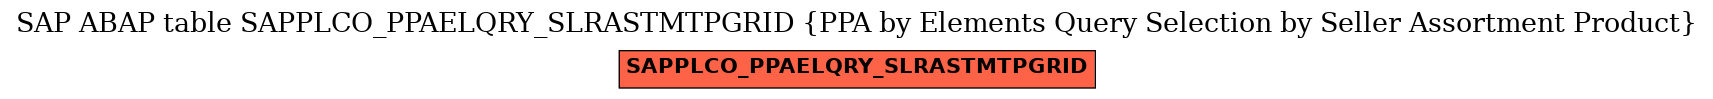 E-R Diagram for table SAPPLCO_PPAELQRY_SLRASTMTPGRID (PPA by Elements Query Selection by Seller Assortment Product)